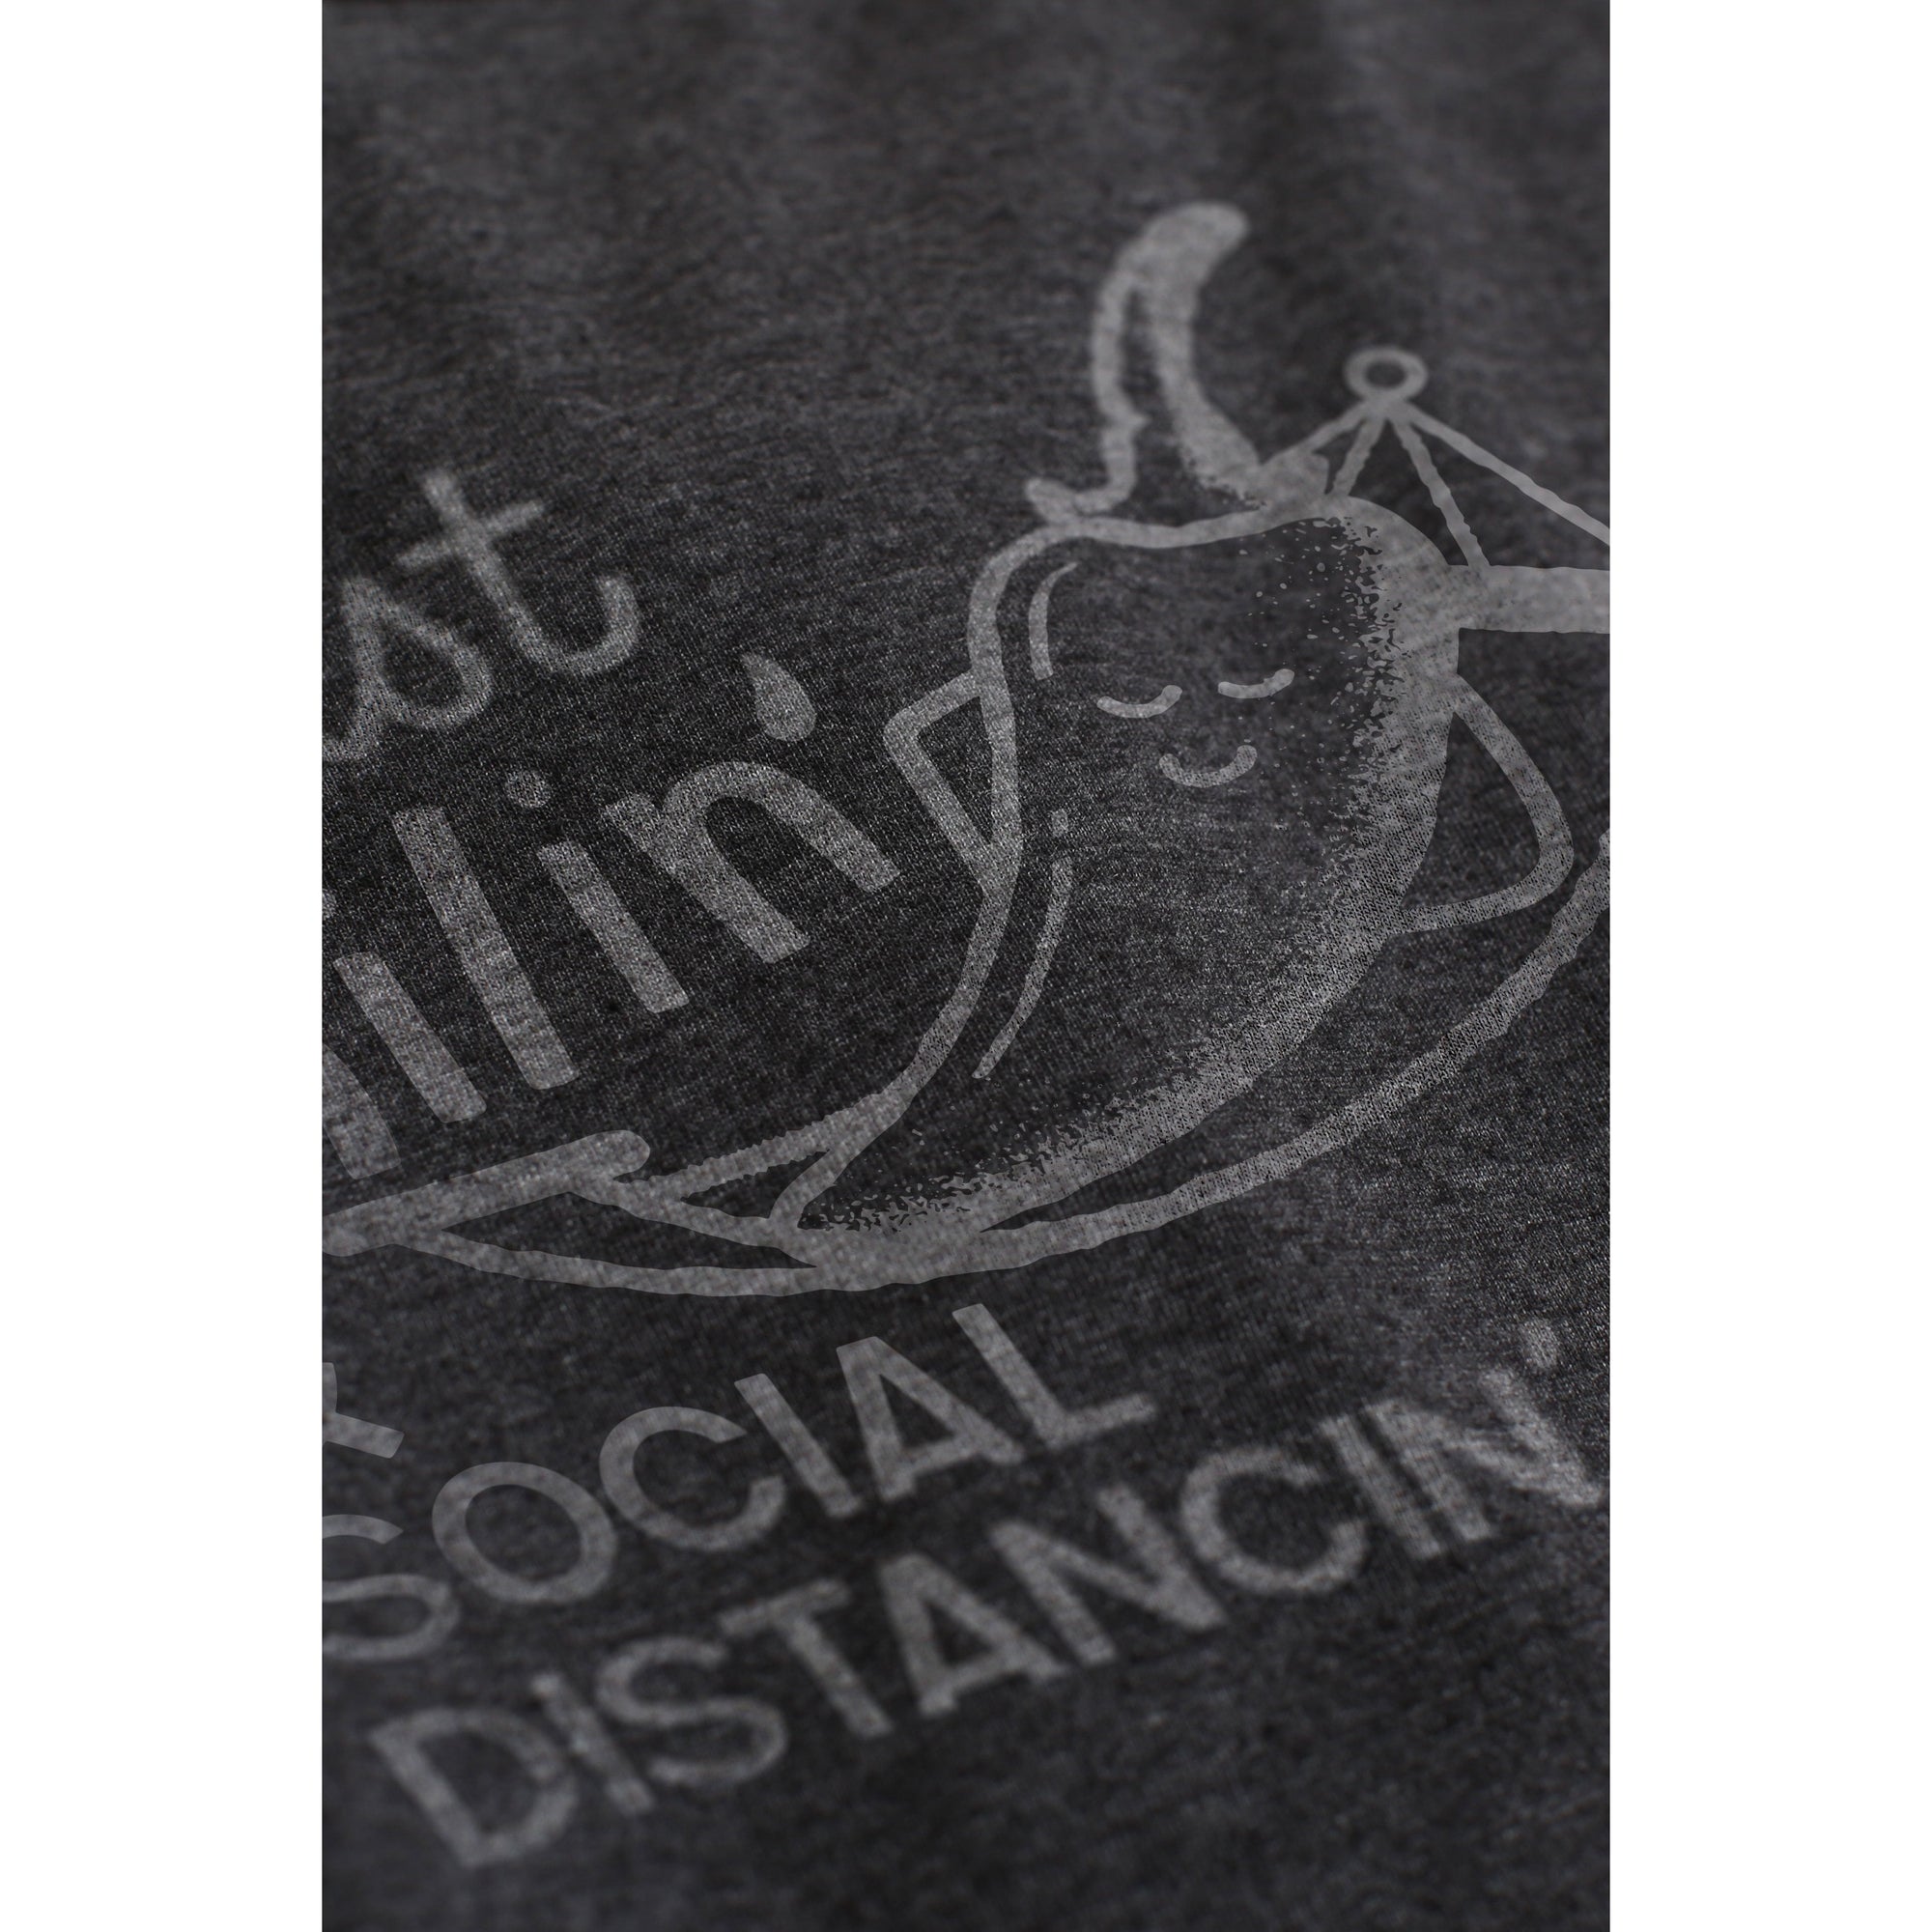 Just Chilin And Social Distancin - Stories You Can Wear by Thread Tank